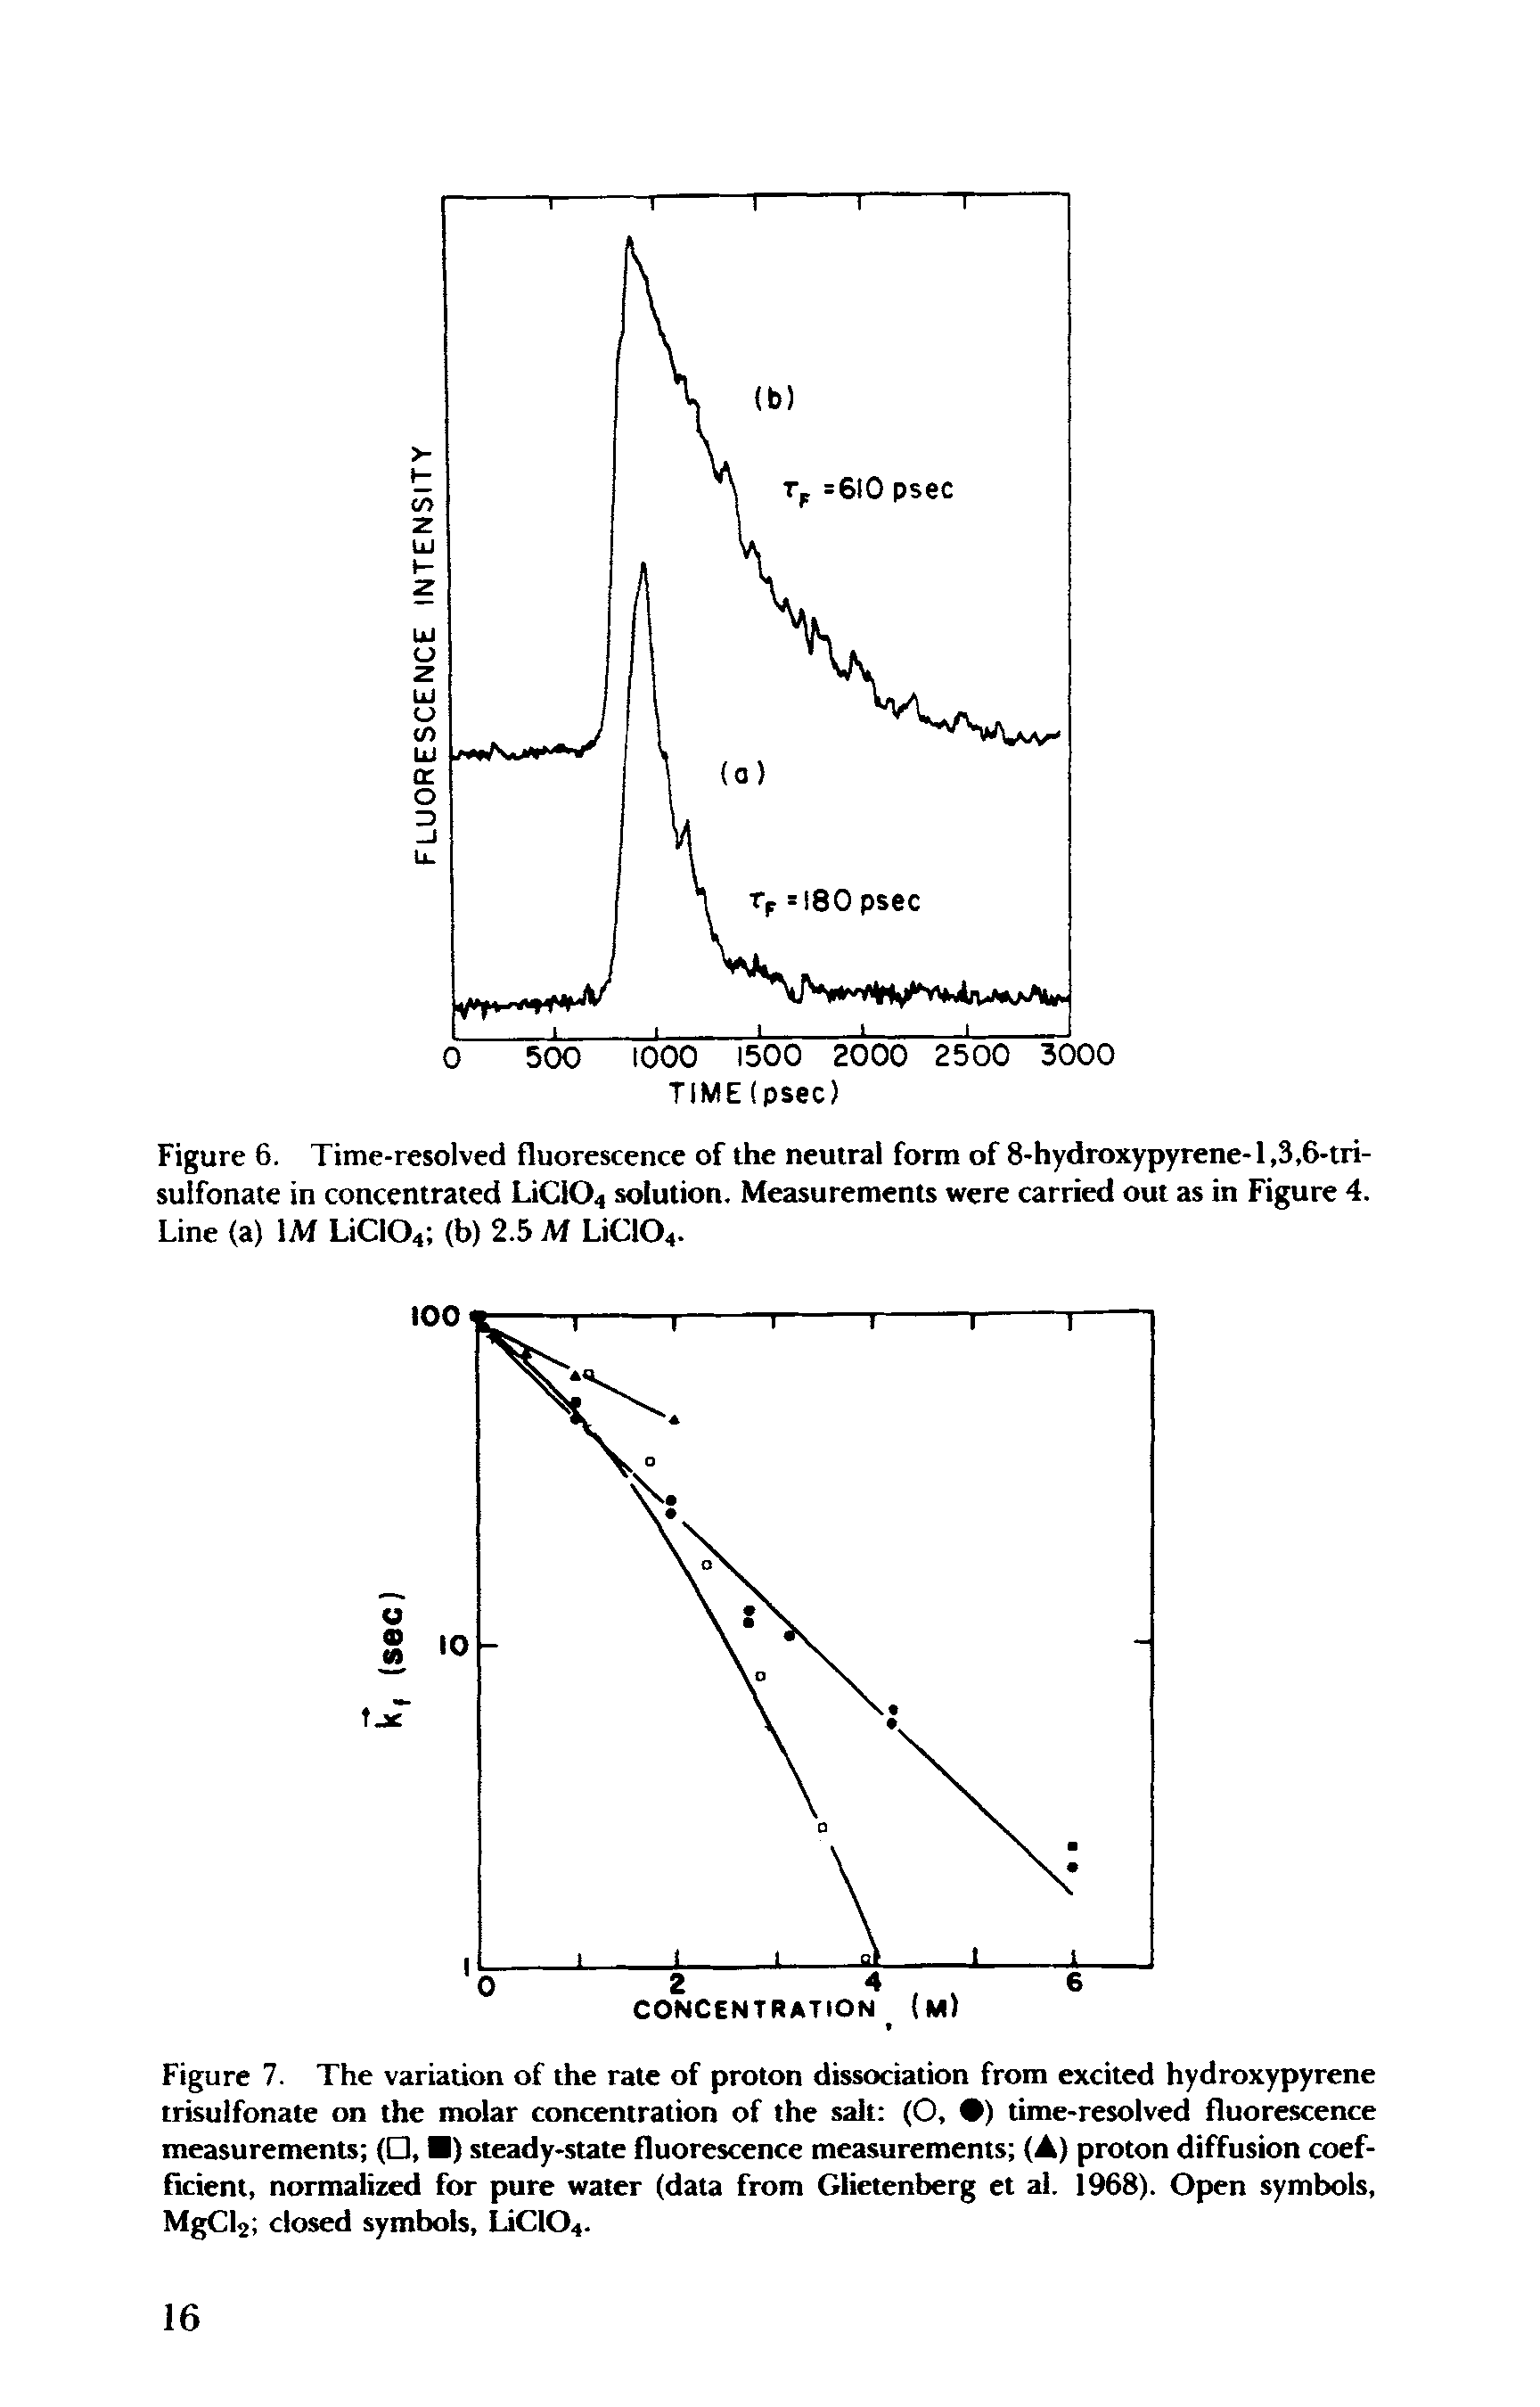 Figure 7. The variation of the rate of proton dissociation from excited hydroxypyrene trisulfonate on the molar concentration of the salt (O, ) time-resolved fluorescence measurements ( , ) steady-state fluorescence measurements (A) proton diffusion coefficient, normalized for pure water (data from Glietenberg et al. 1968). Open symbols, MgCl2 closed symbols, LiC104.